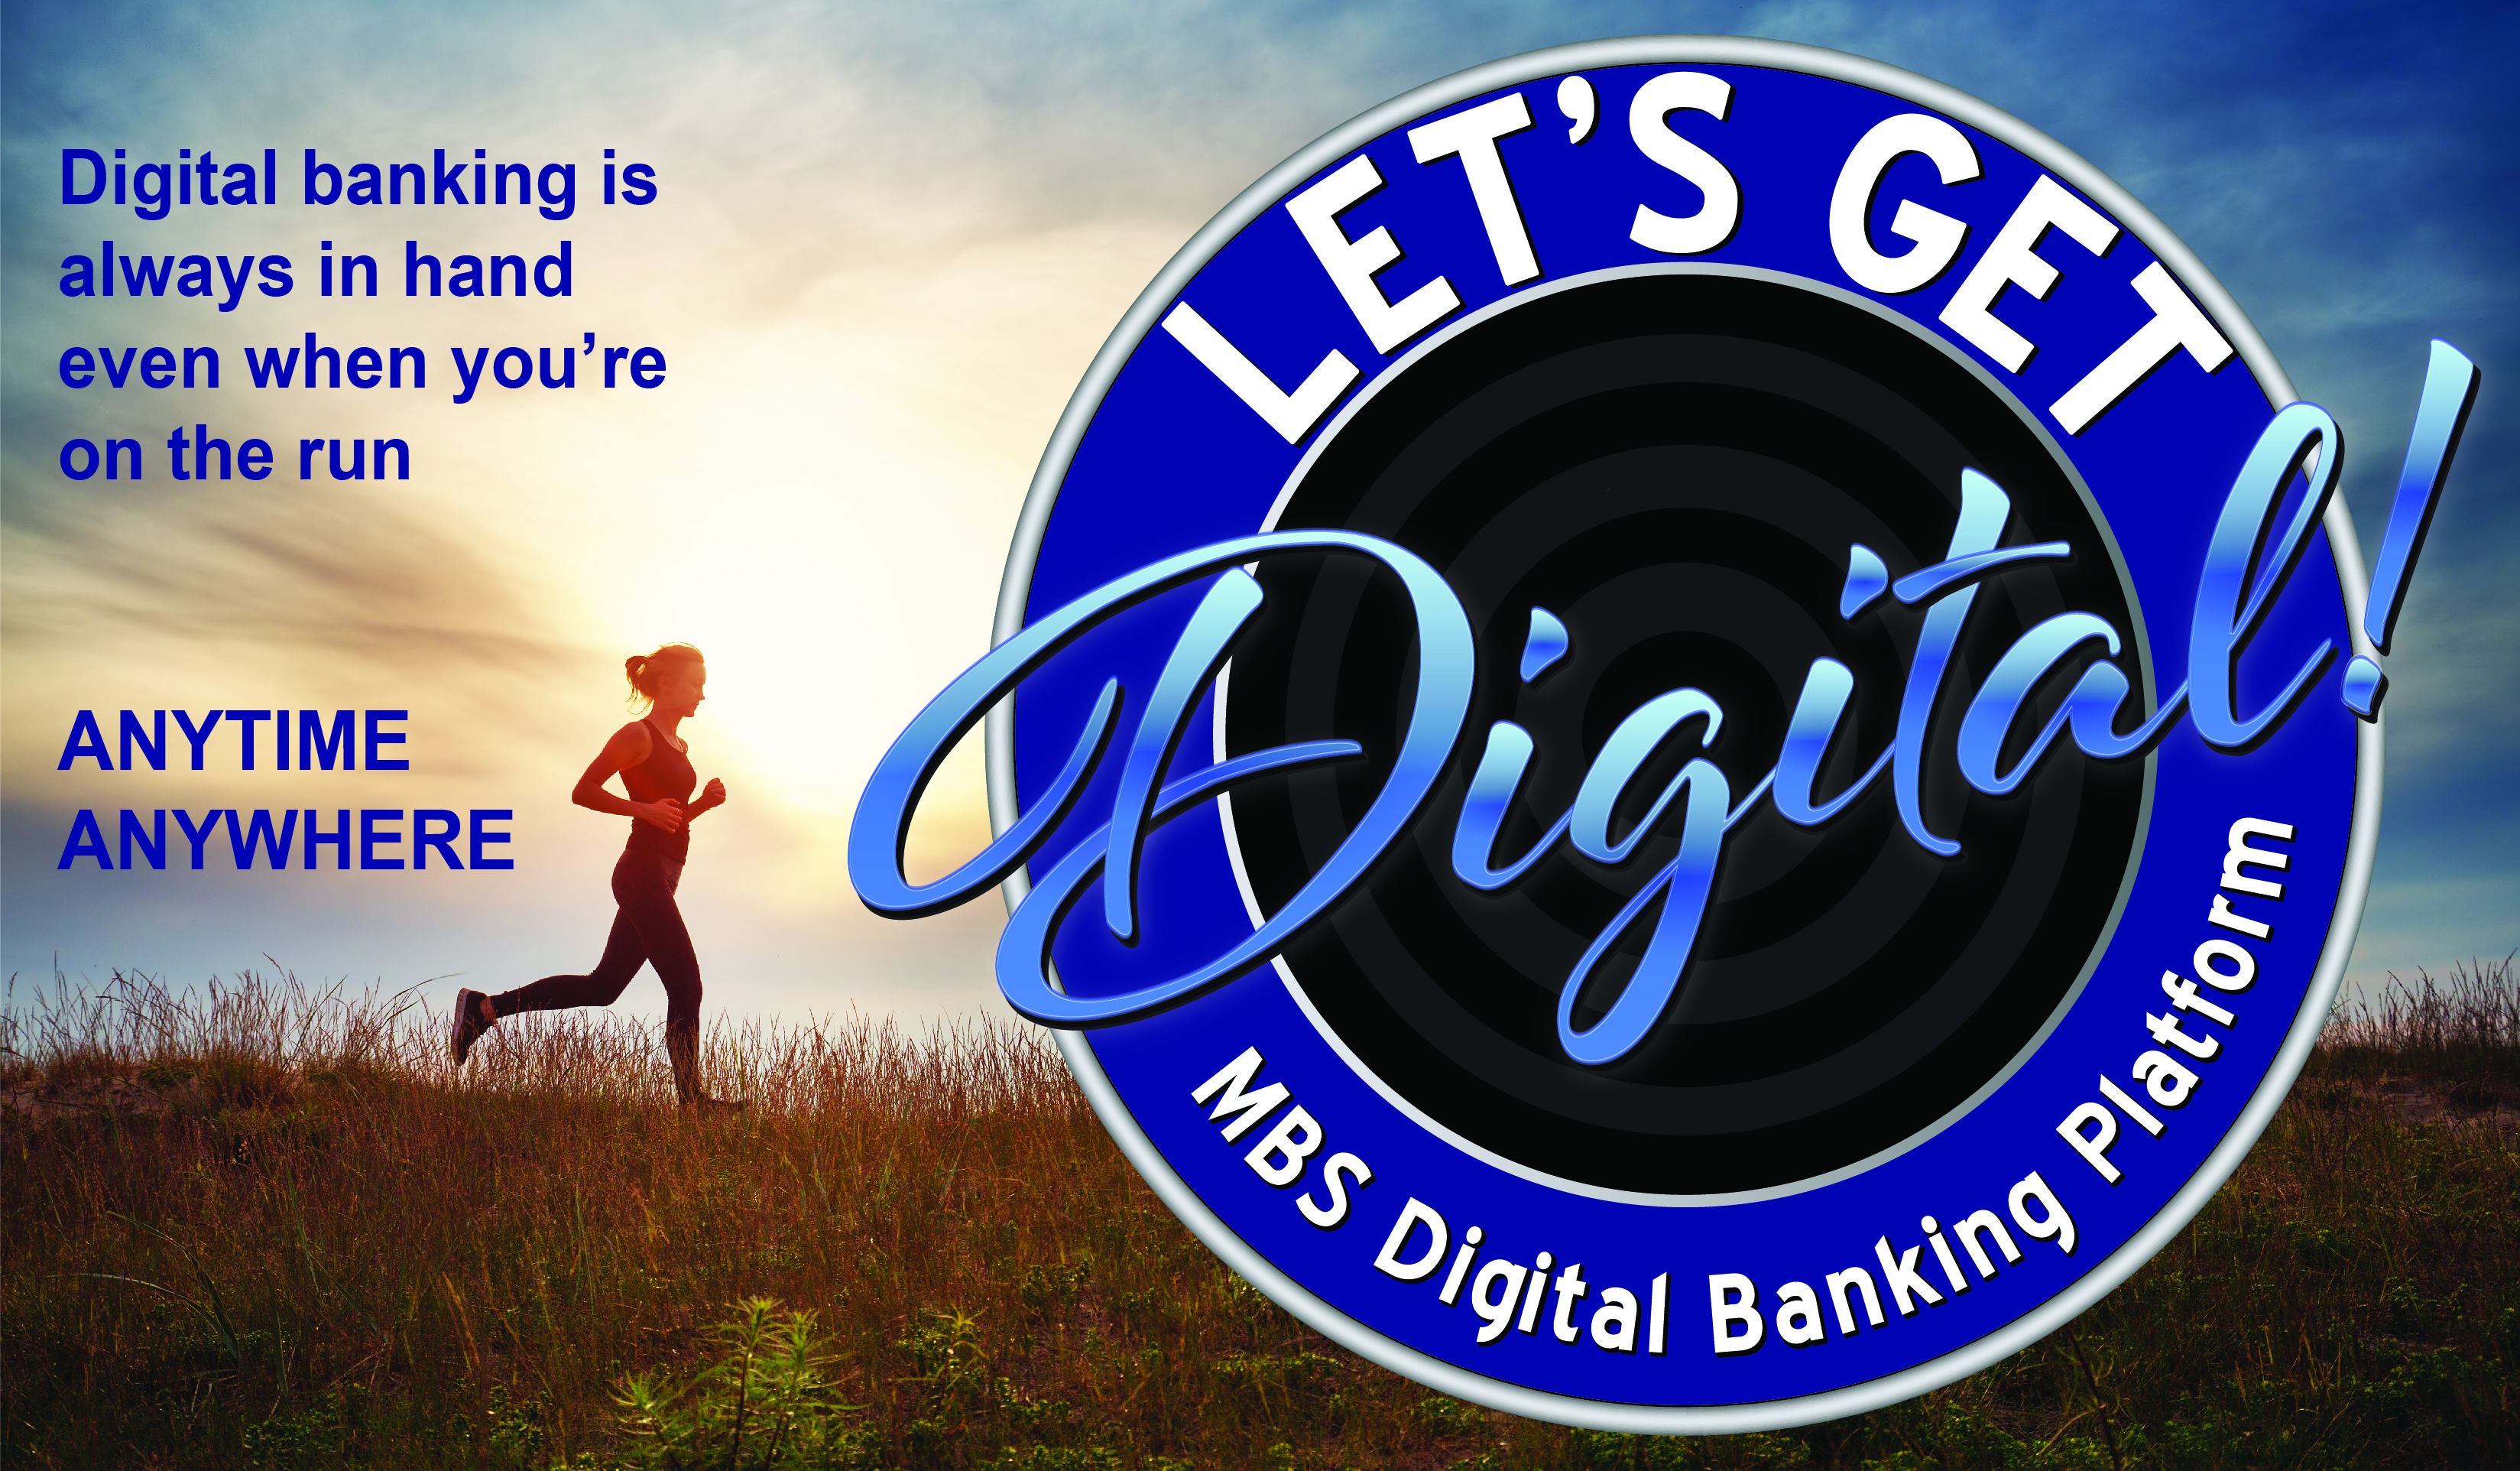 Digital Banking is always available, on the run or on the go. MBS DIGITAL PLATFORM.